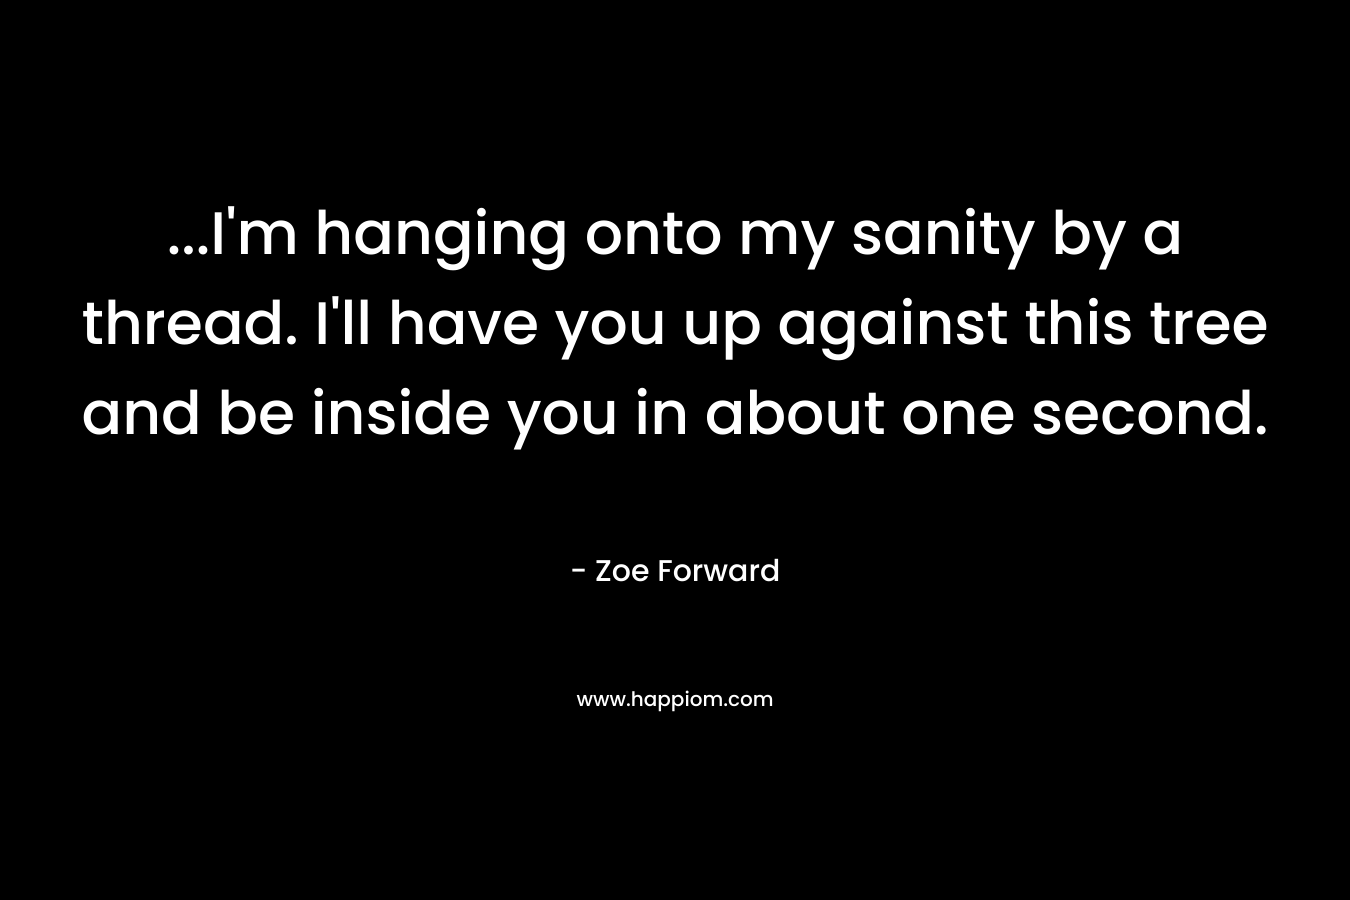 …I’m hanging onto my sanity by a thread. I’ll have you up against this tree and be inside you in about one second. – Zoe Forward